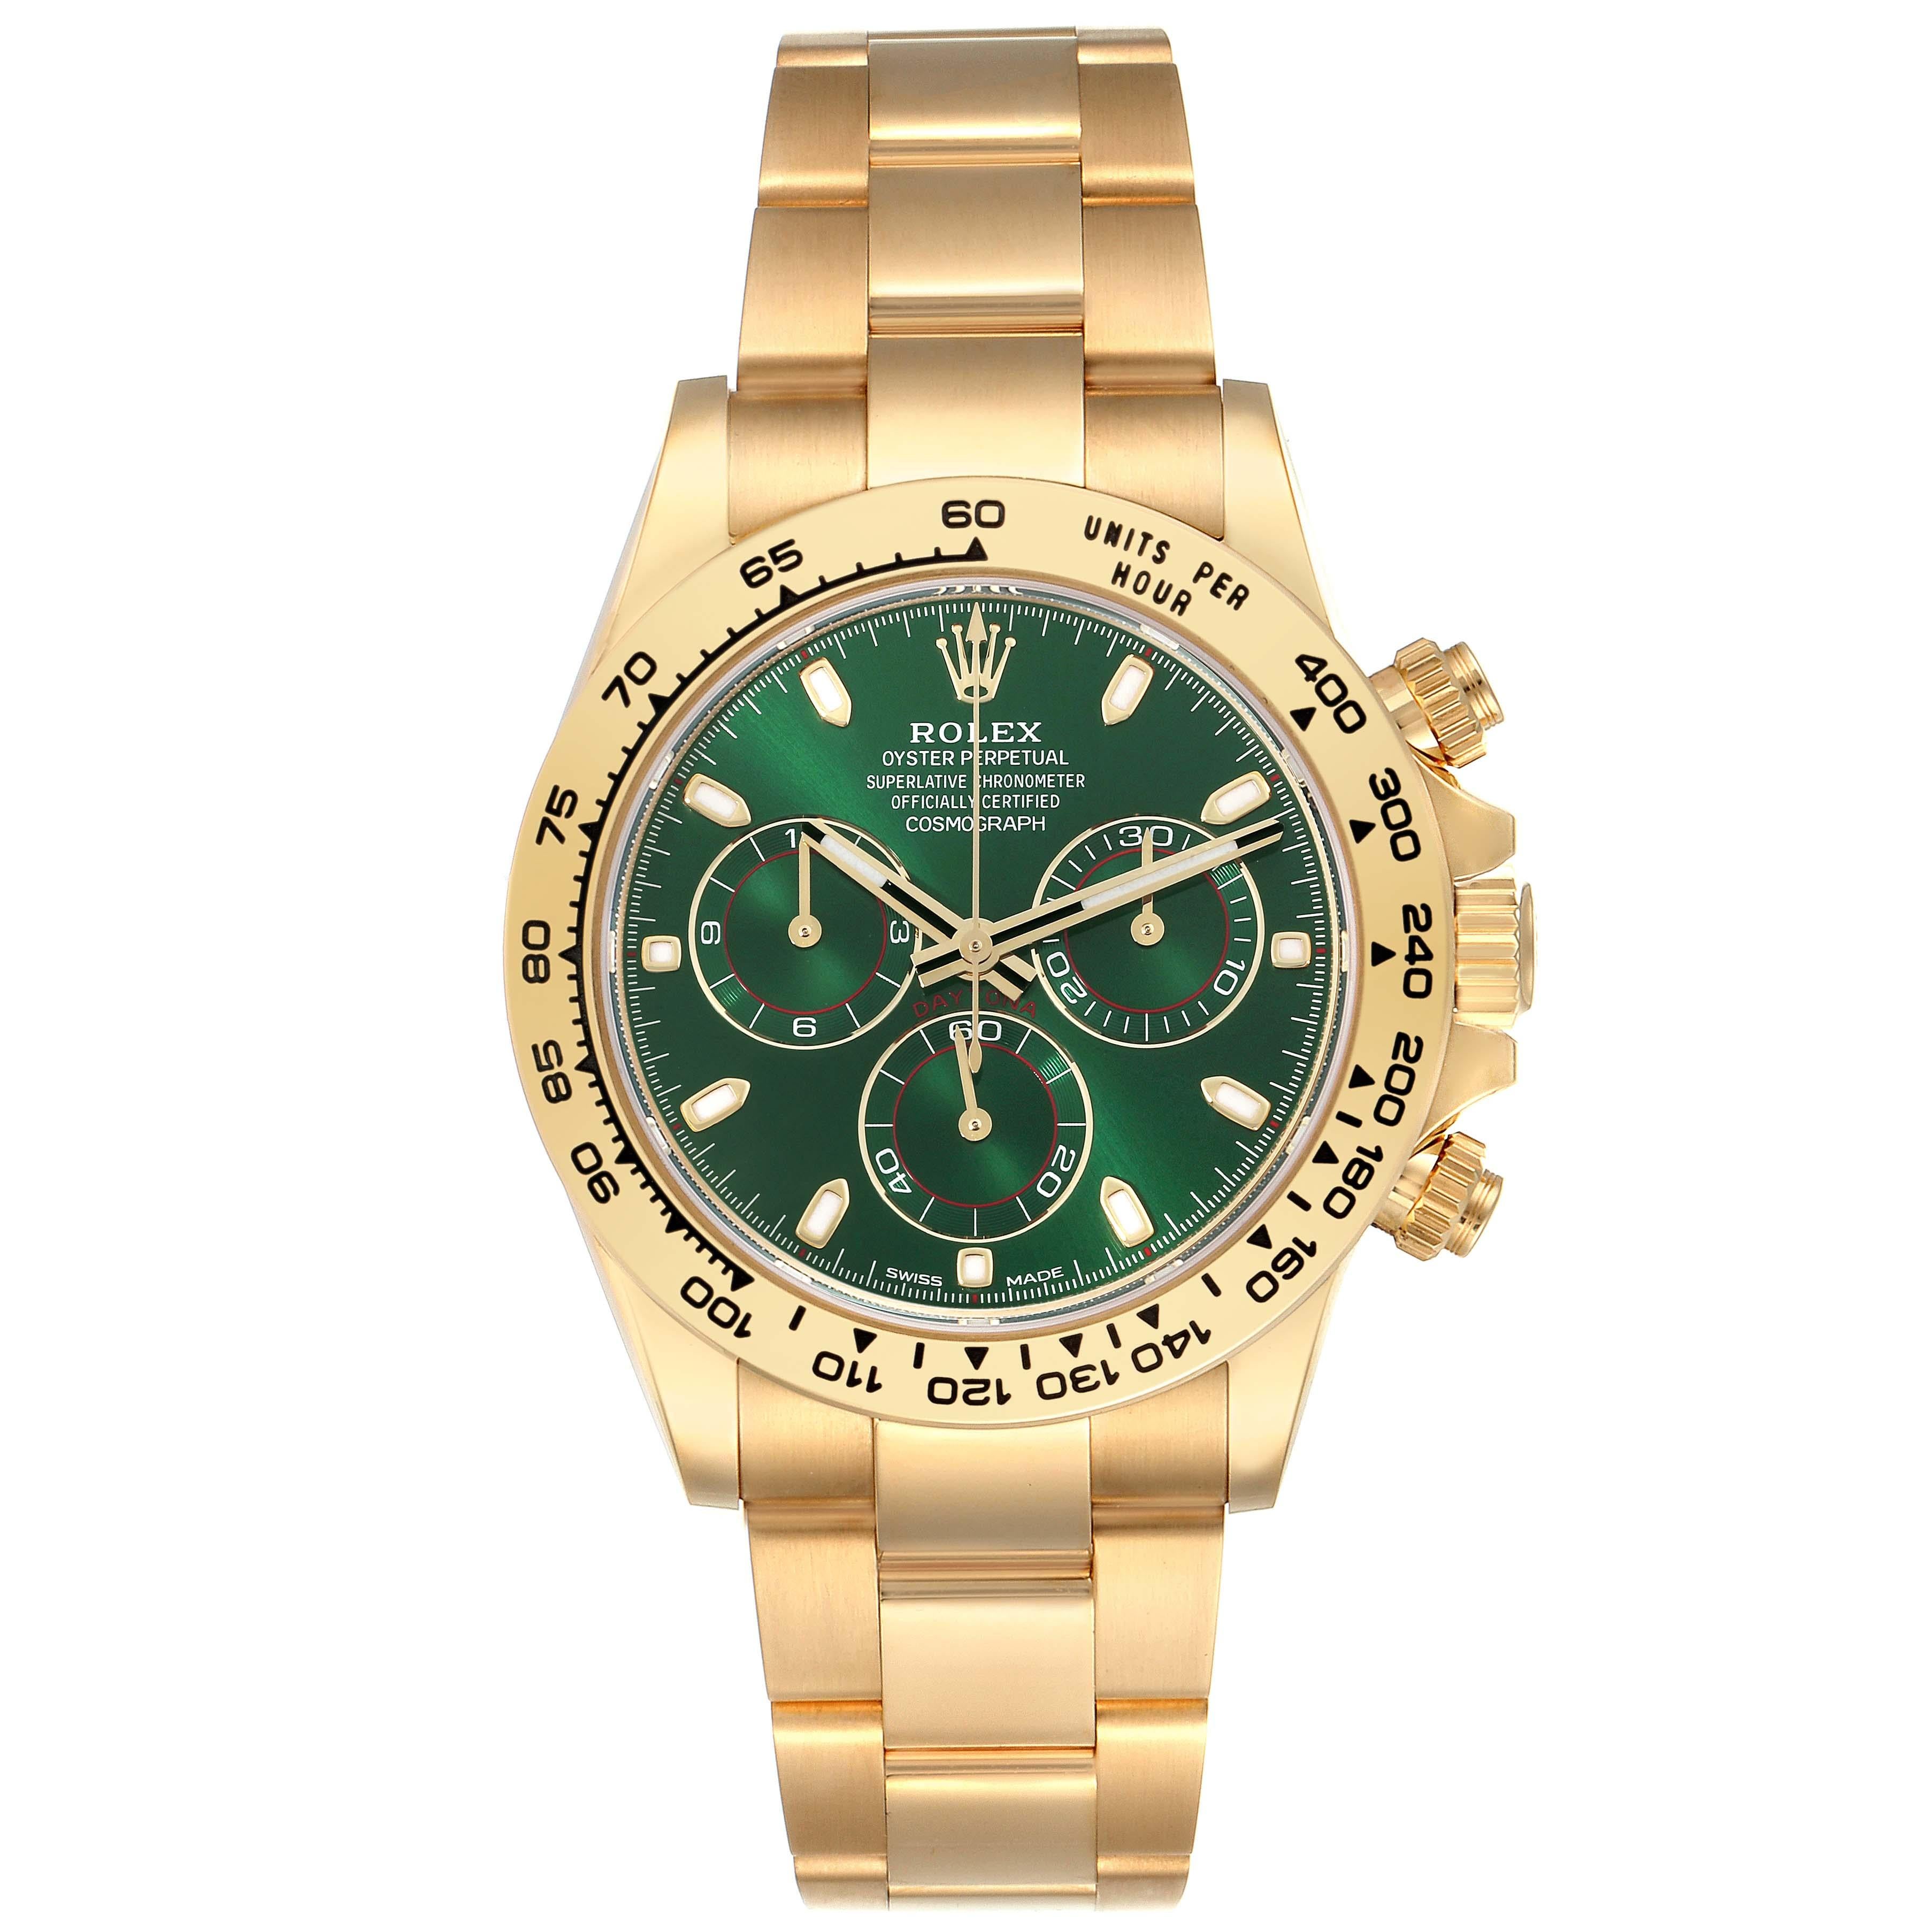 Rolex Daytona Yellow Gold Green Dial Mens Watch 116508 Box Card. Officially certified chronometer self-winding movement. Rhodium-plated, 44 jewels, straight line lever escapement, monometallic balance adjusted to temperatures and 5 positions, shock